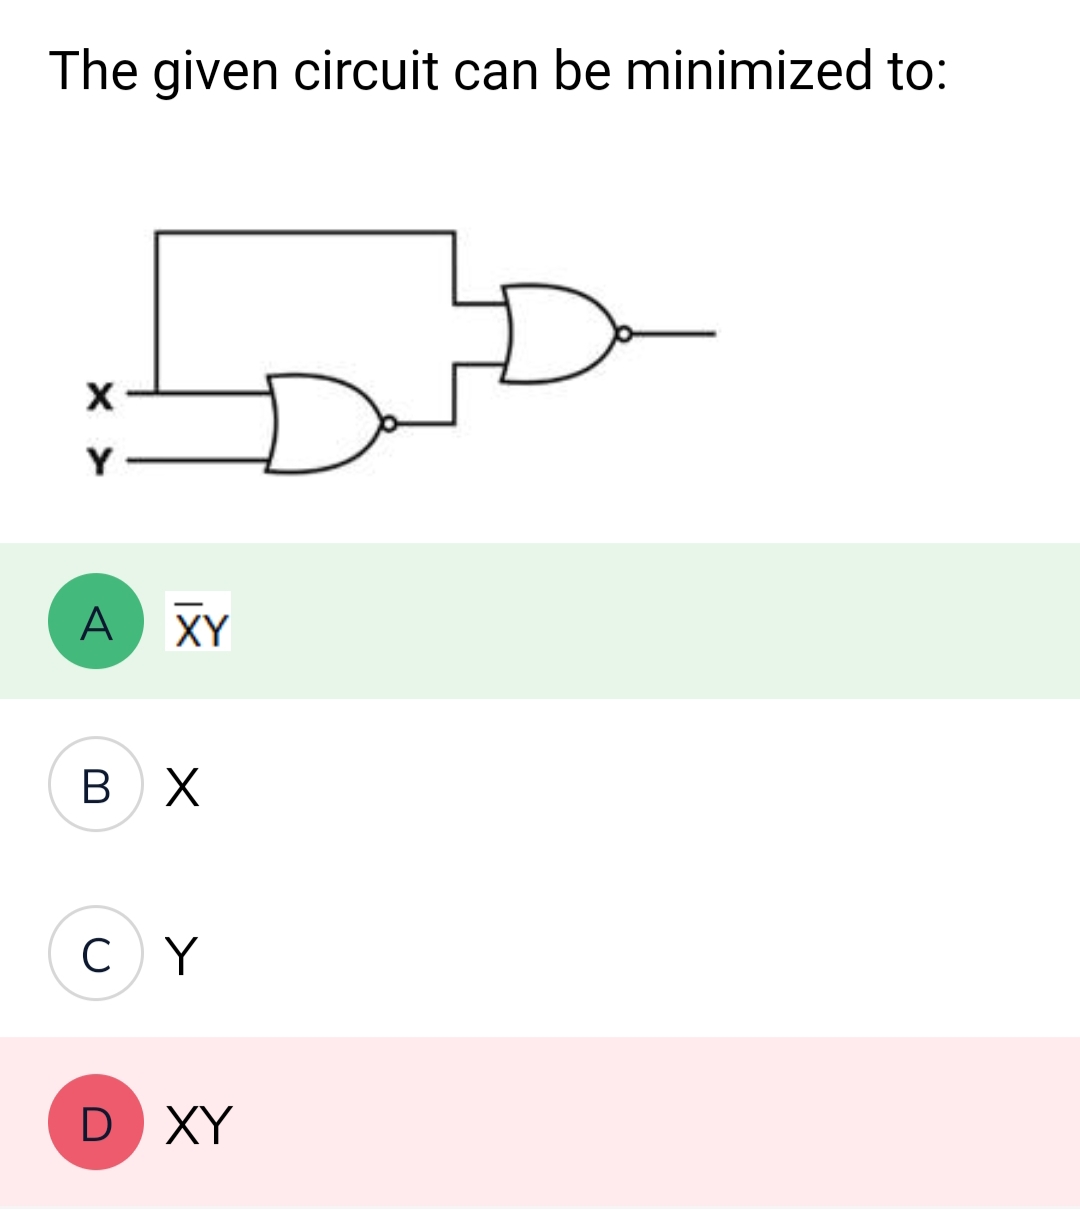 The given circuit can be minimized to:
X>
Y
A XY
B X
C)Y
D XY